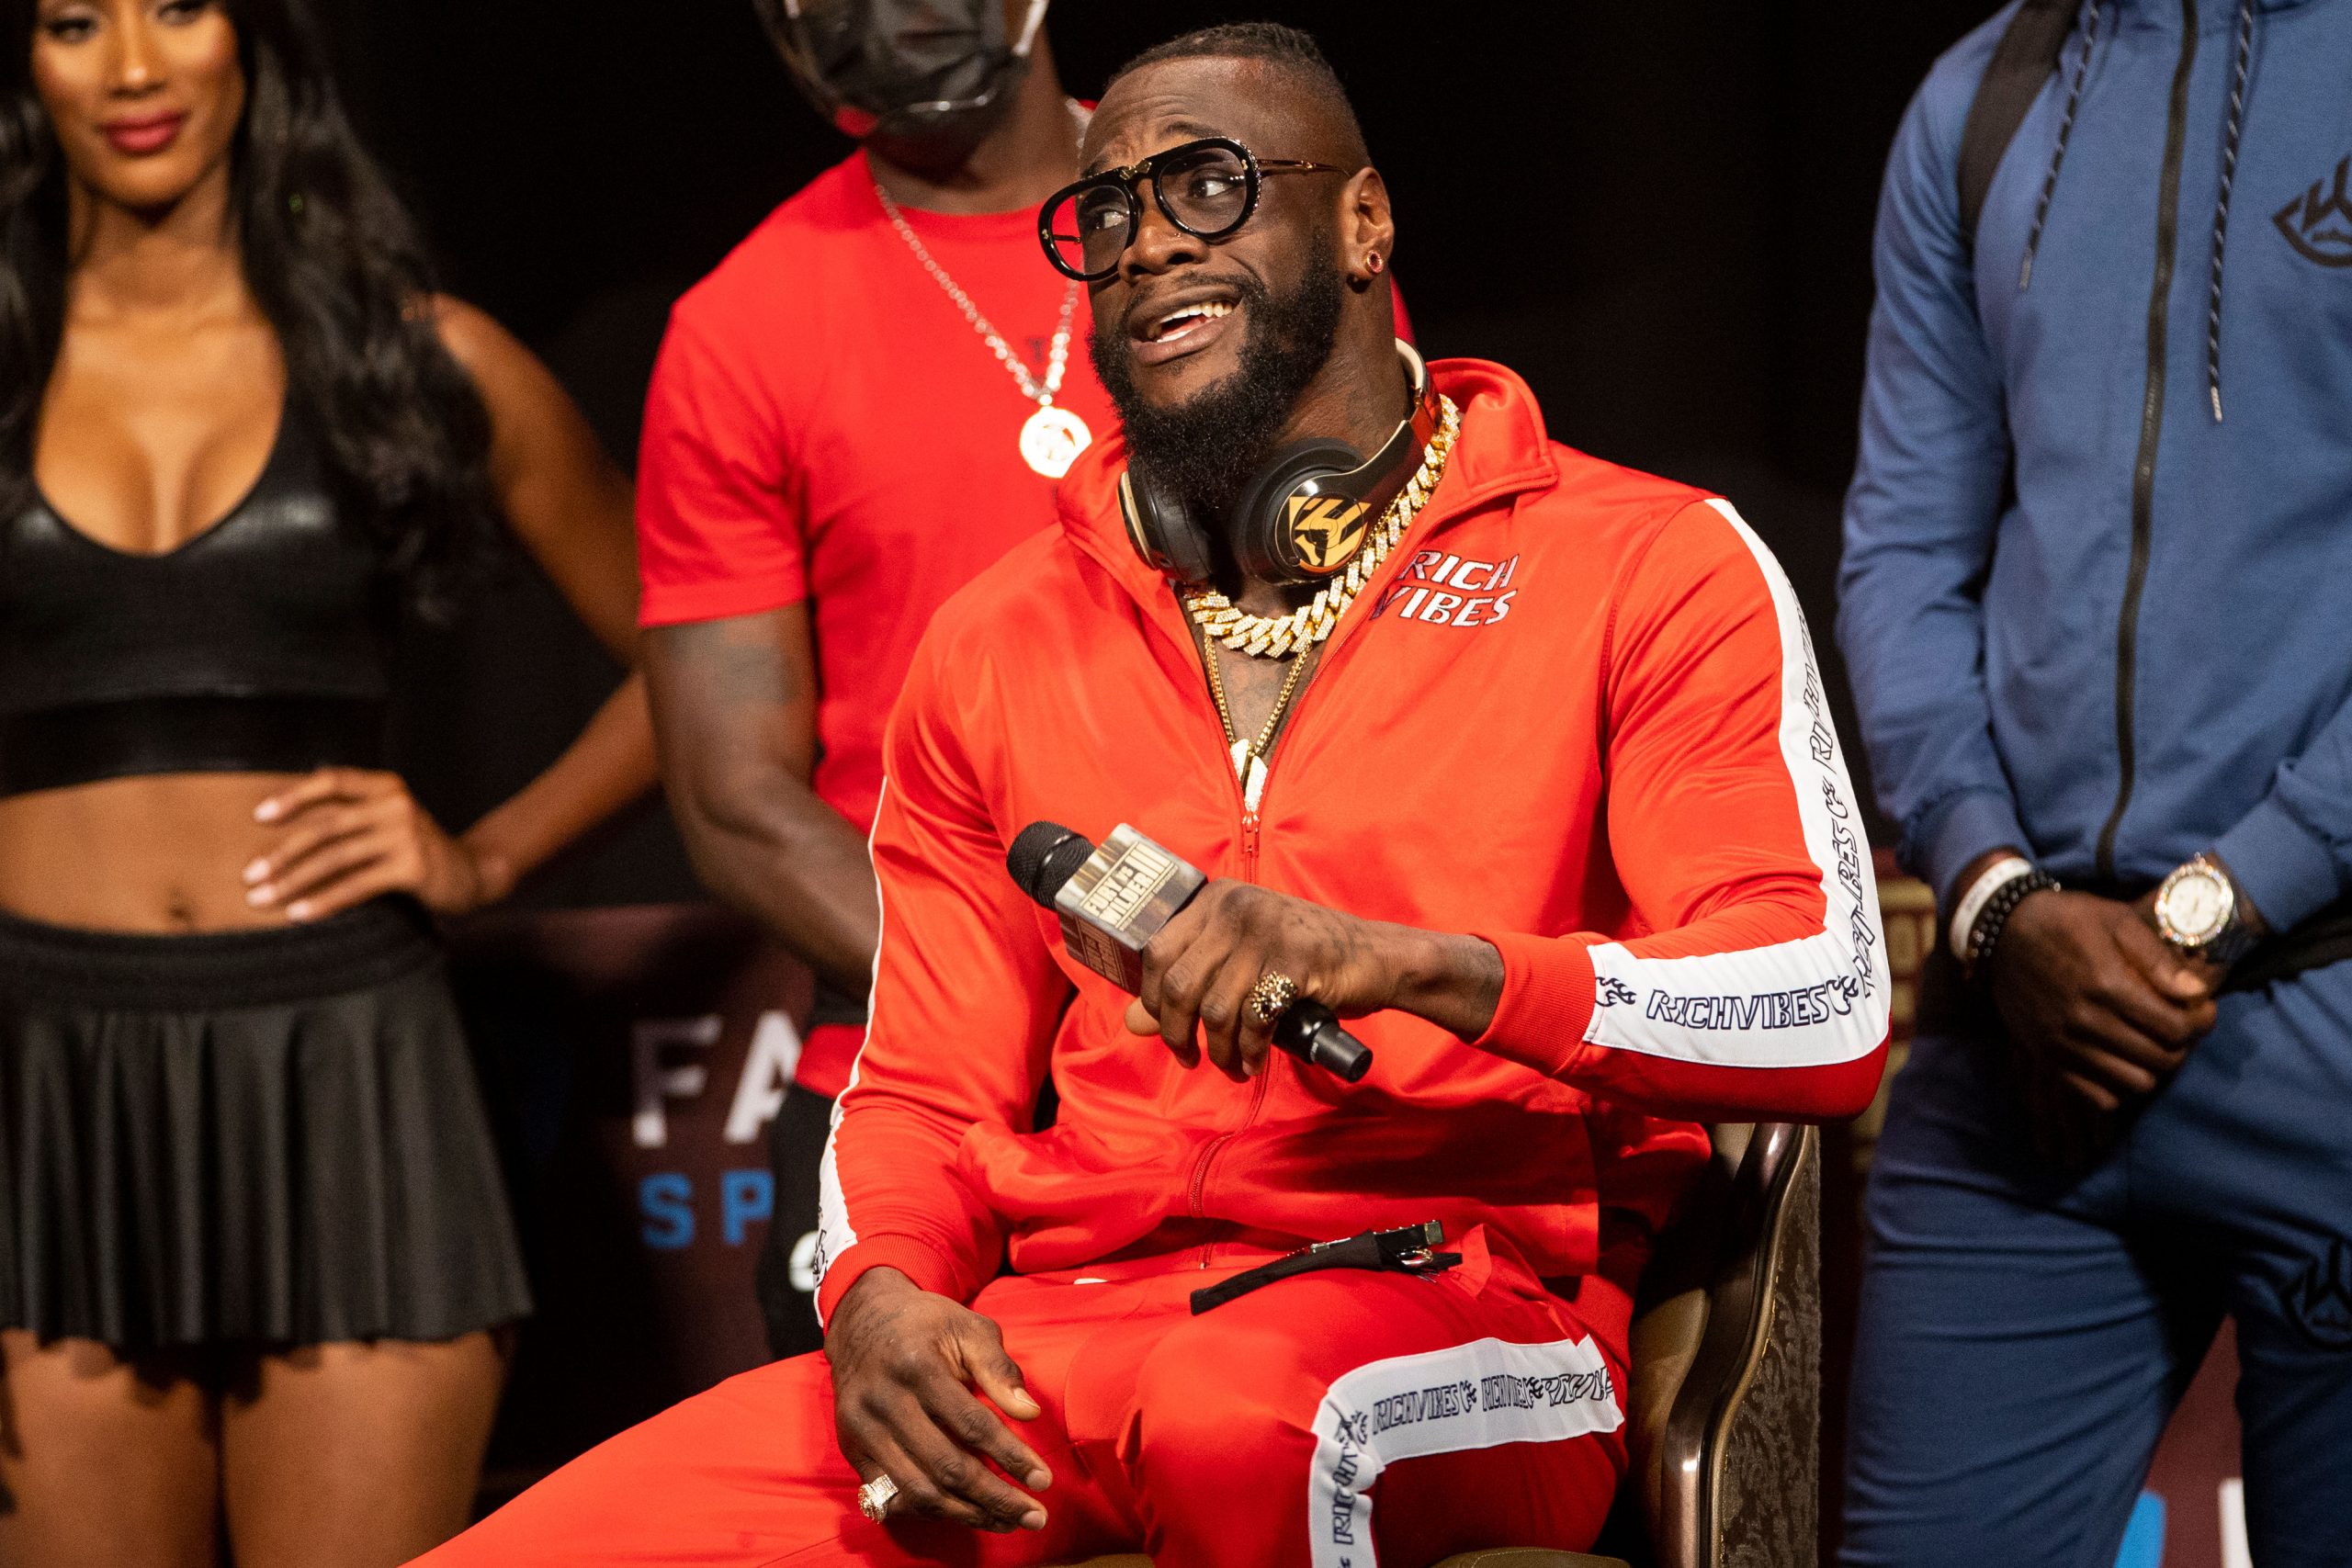 Deontay Wilder: The former WBC champion and Tyson Fury’s arch rival